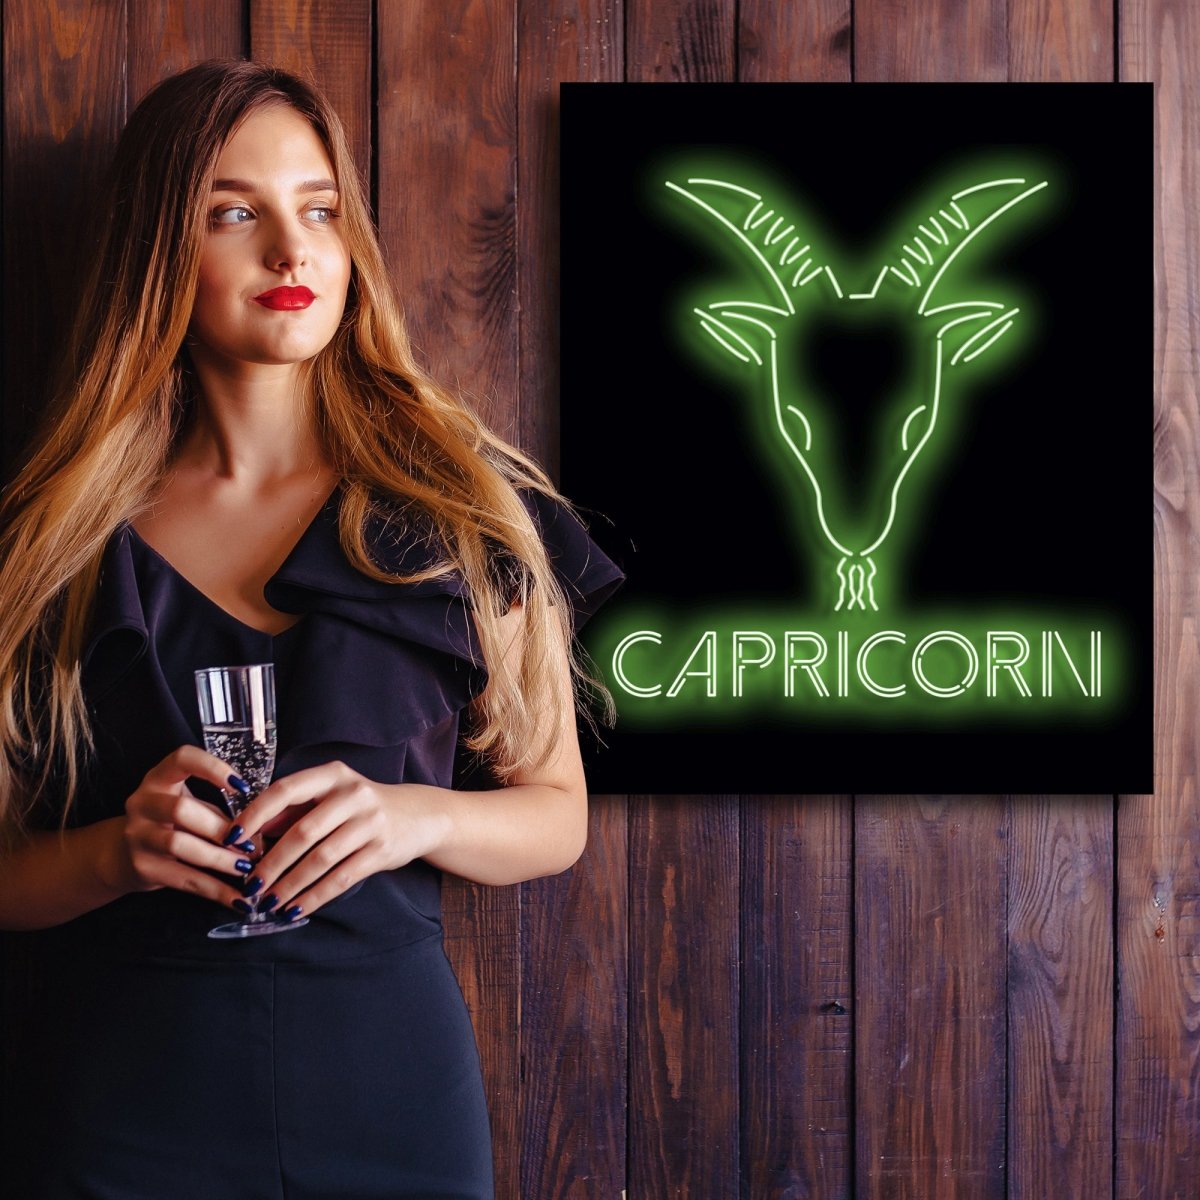 Personalised LED Neon Sign CAPRICORN - madaboutneon